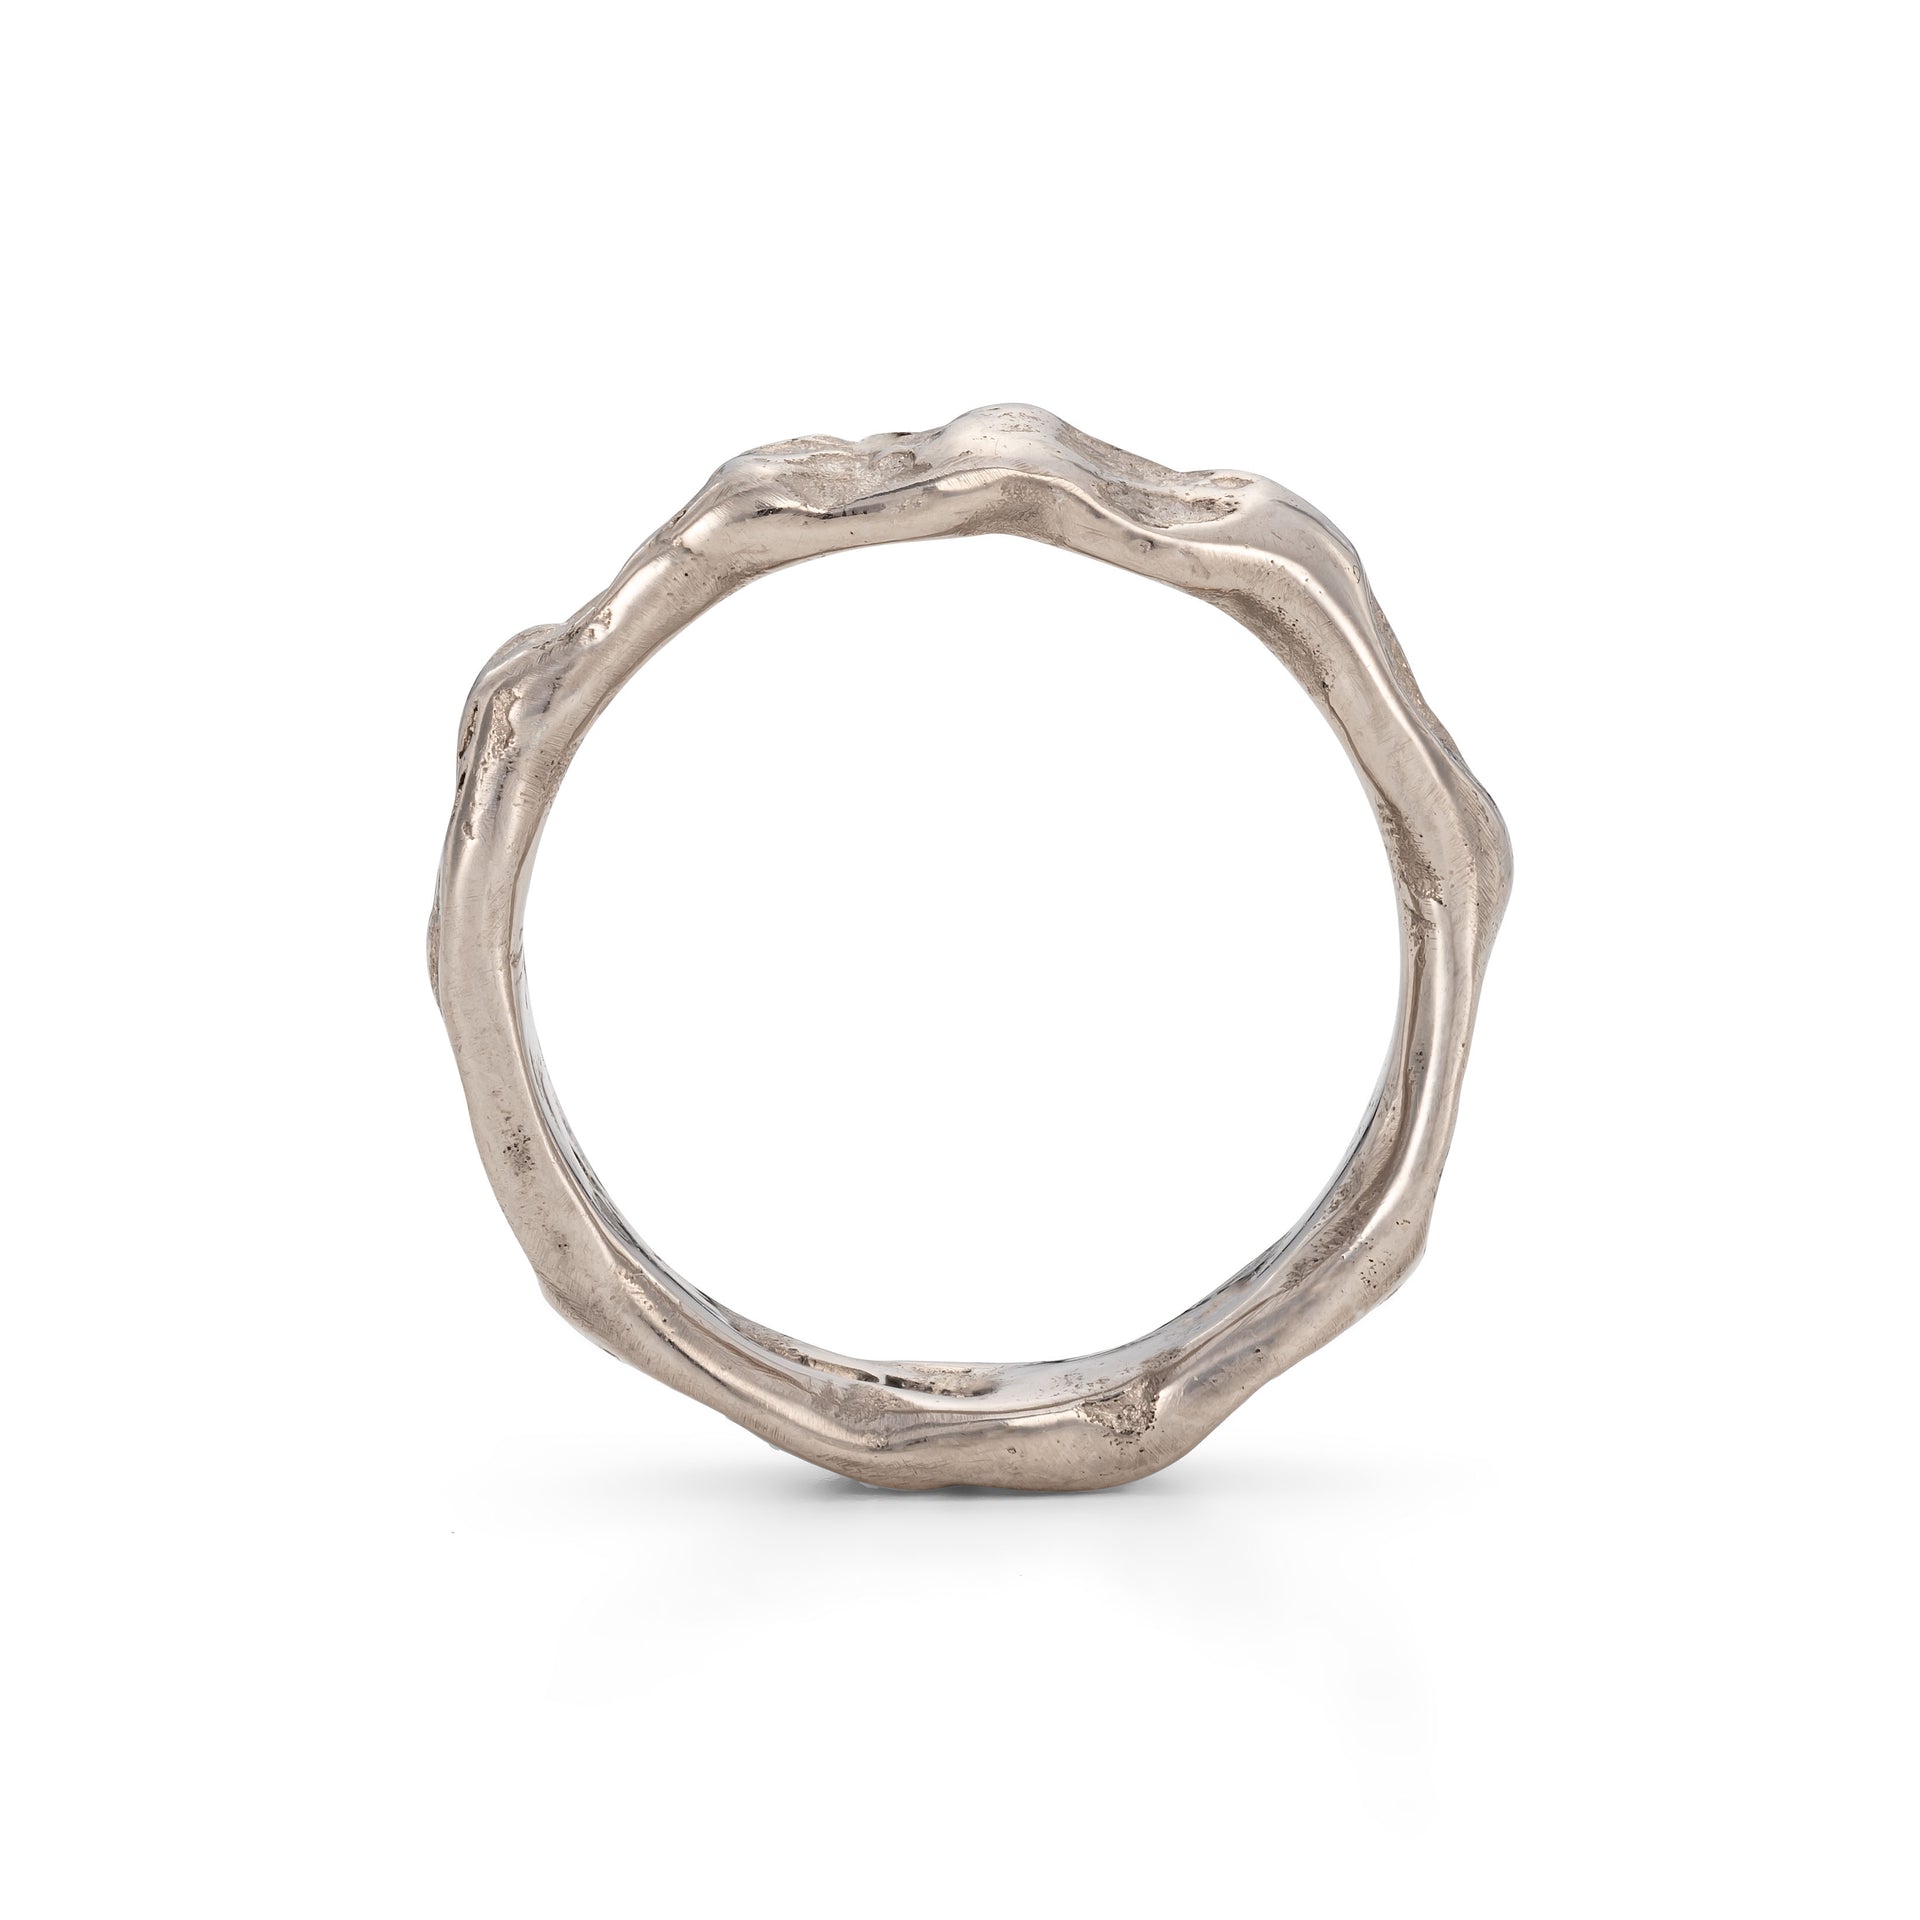 Cockle Medium Ring 18ct White Gold